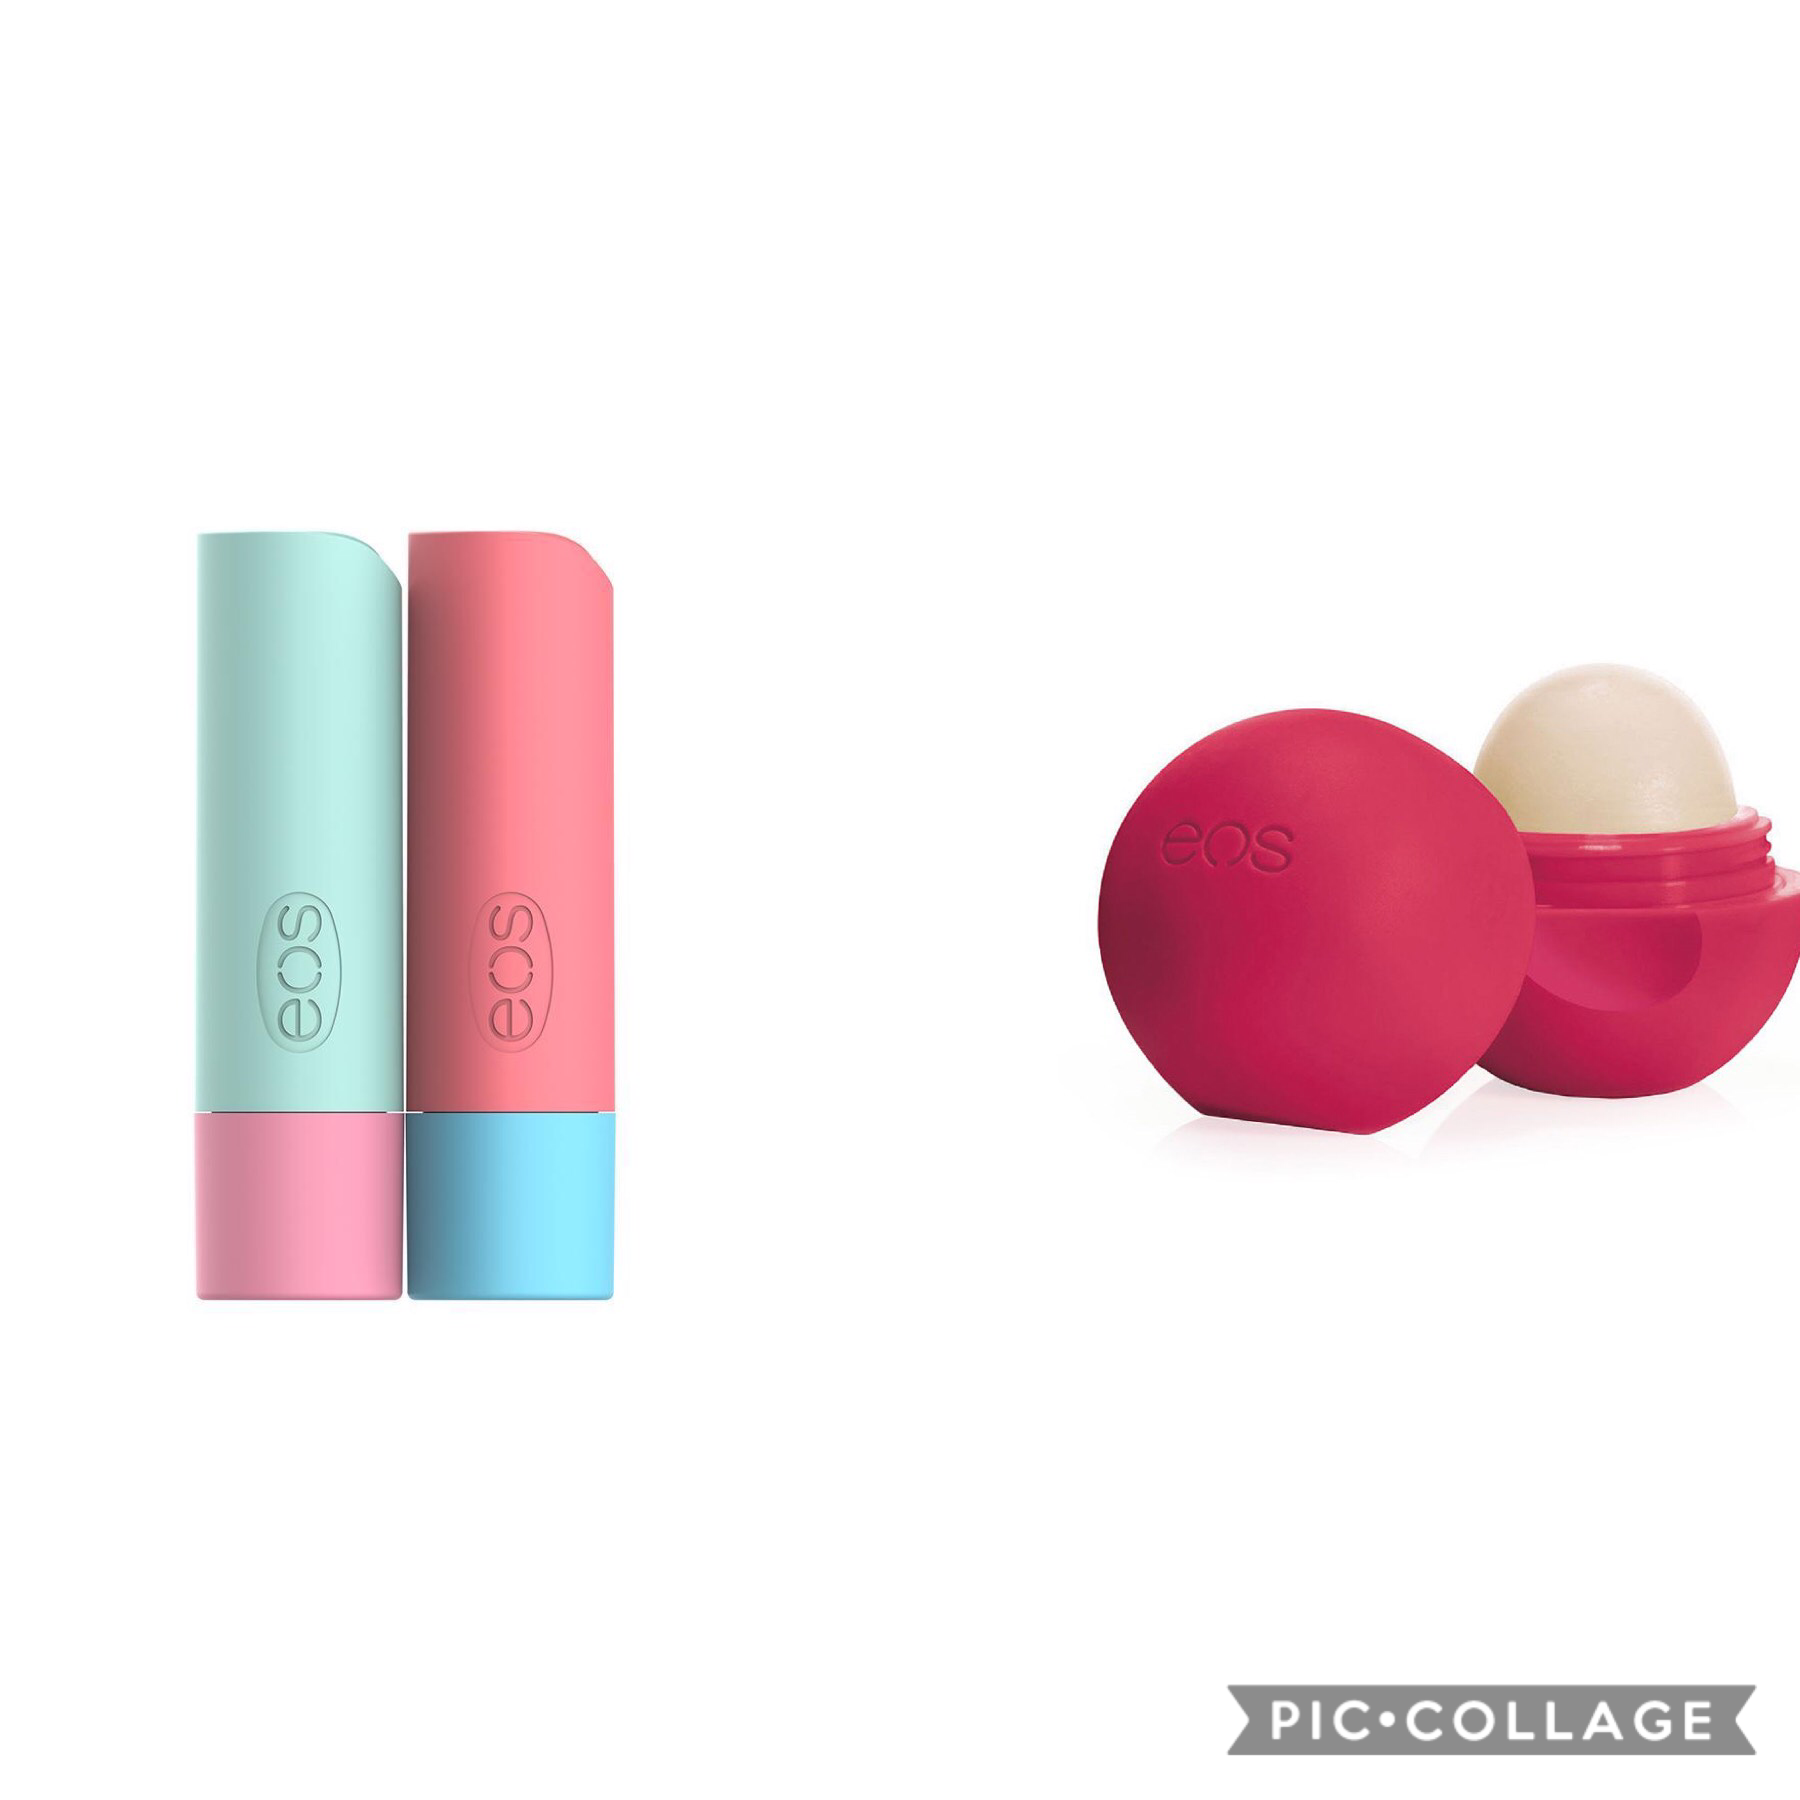 Which EOS do you like?